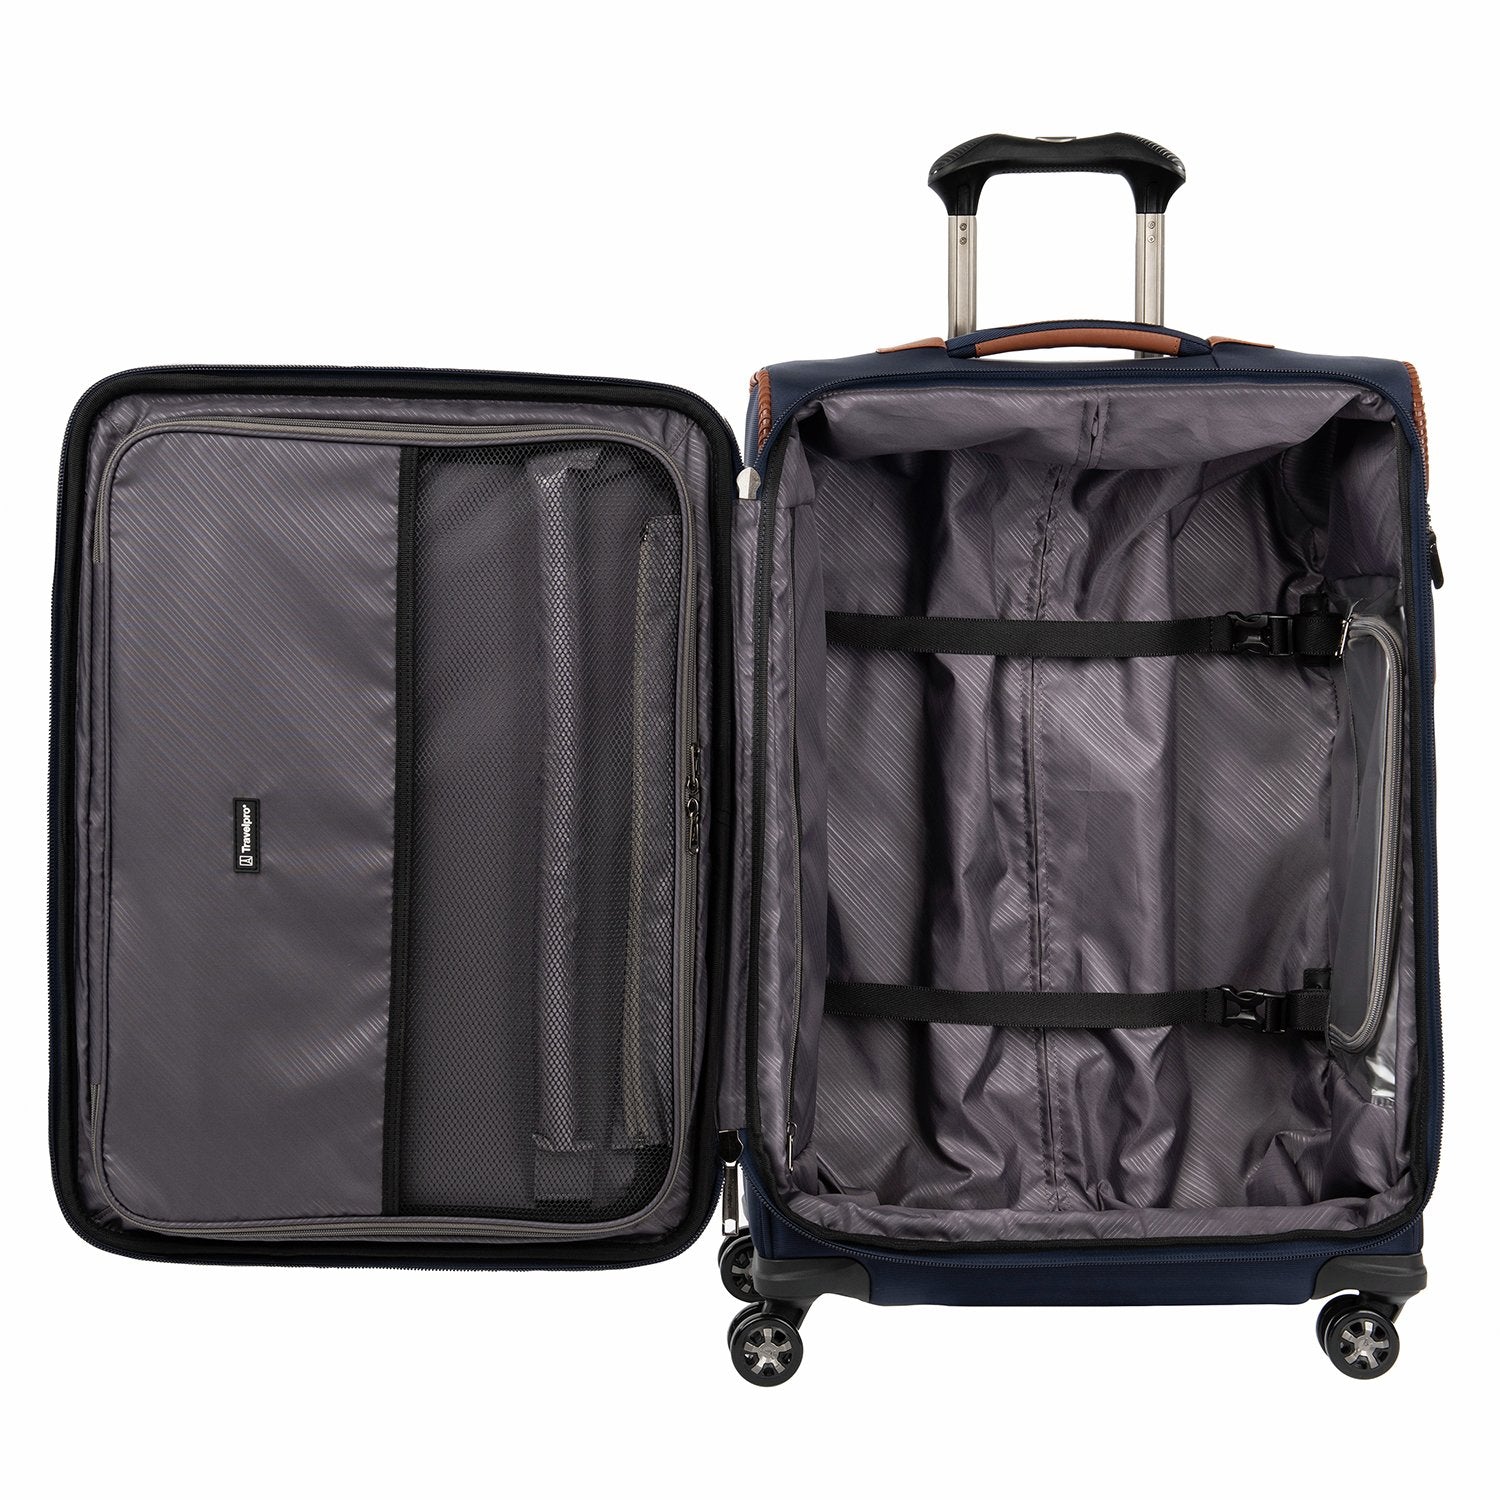 TRAVELPRO CREW™ VERSAPACK™ 25" EXPANDABLE SPINNER SUITER PATRIOT BLUE